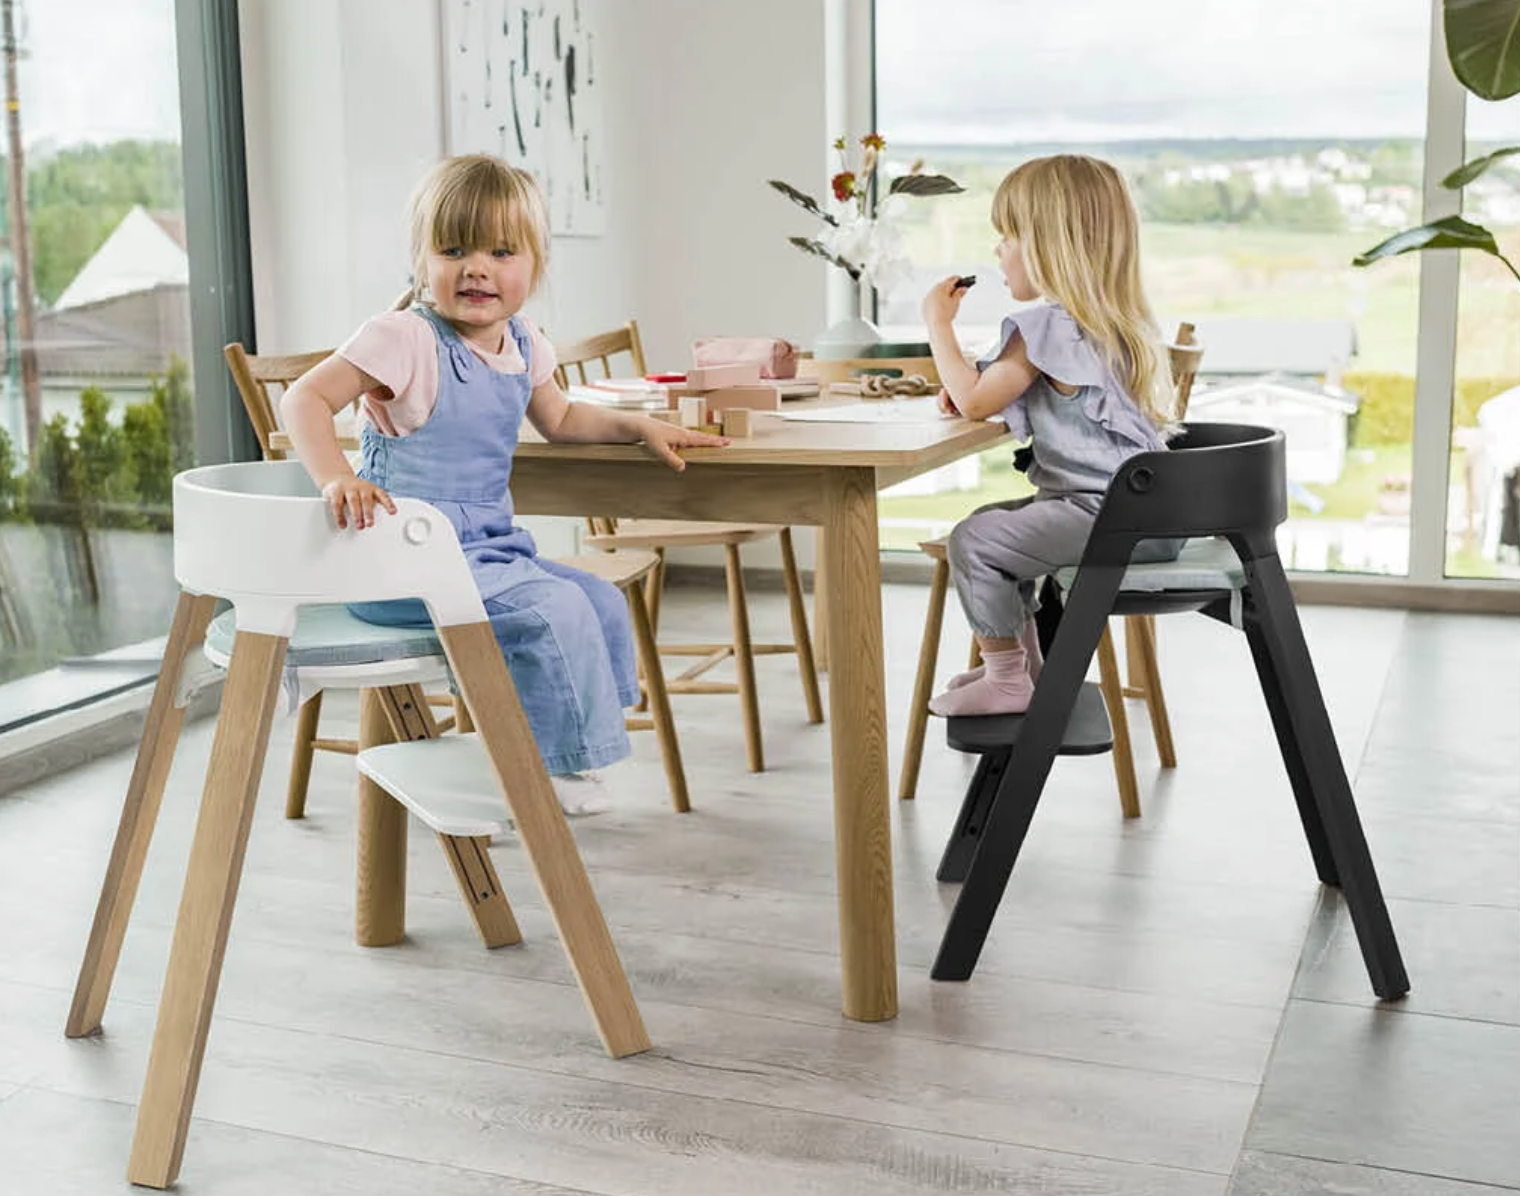 Chaise Steps Stokke